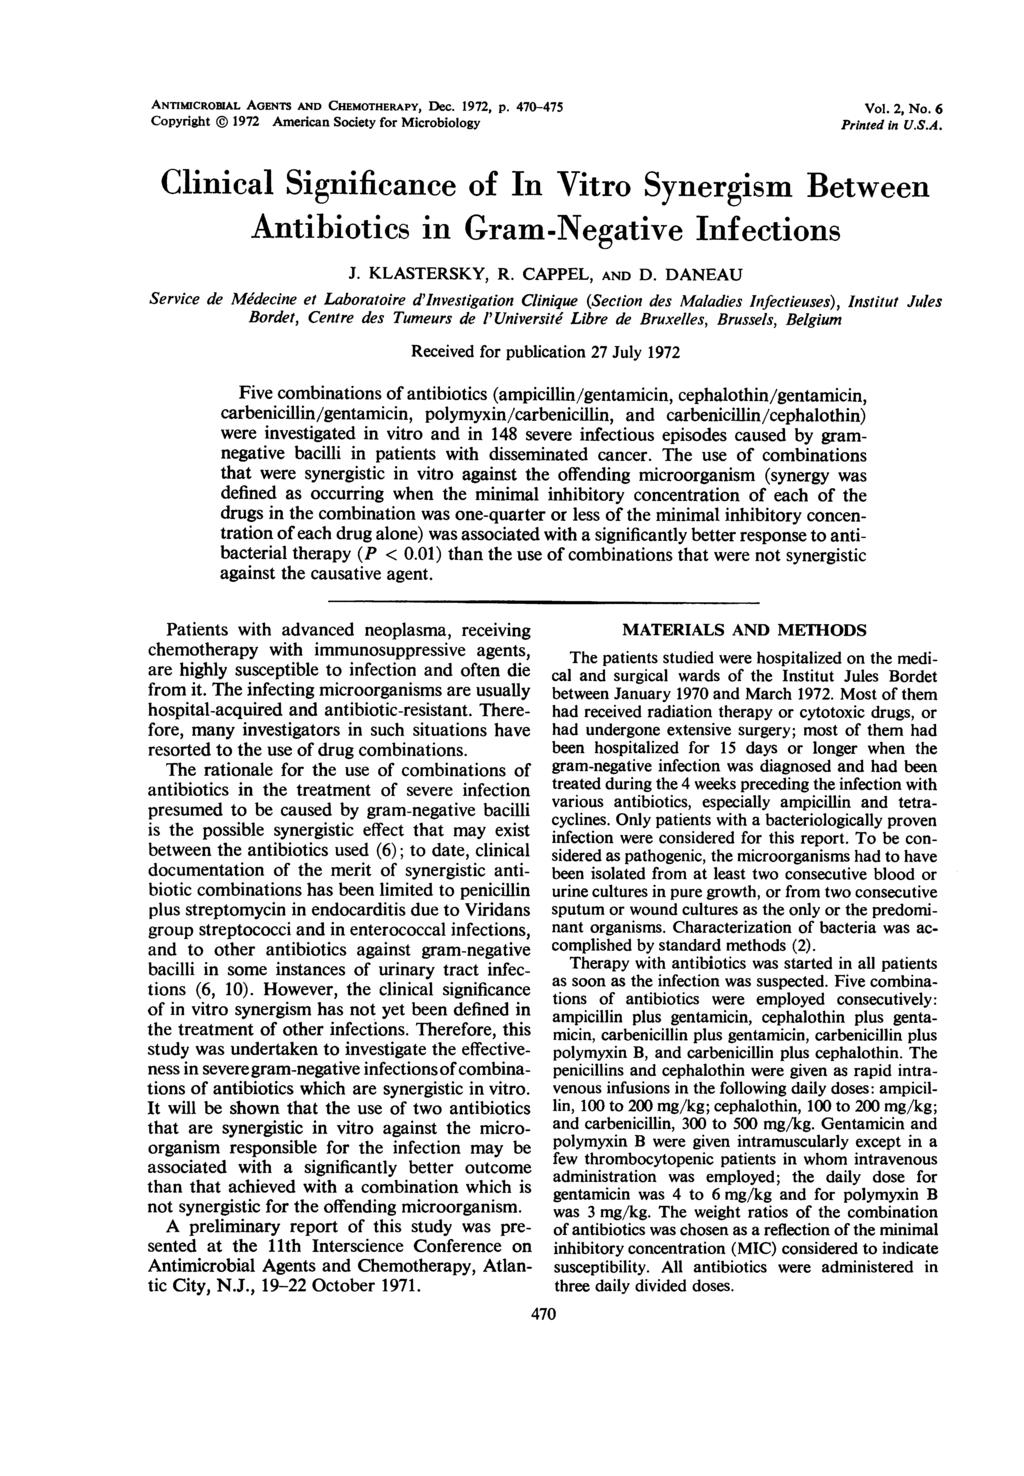 ANTIMICOBIAL AGENTS AND CHEMOTHEAPY, Dec. 1972, p. 470-475 Copyright 1972 American Society for Microbiology Vol. 2, No. 6 Printed in U.S.A. Clinical Significance of In Vitro Synergism Between Antibiotics in Gram-Negative Infections J.